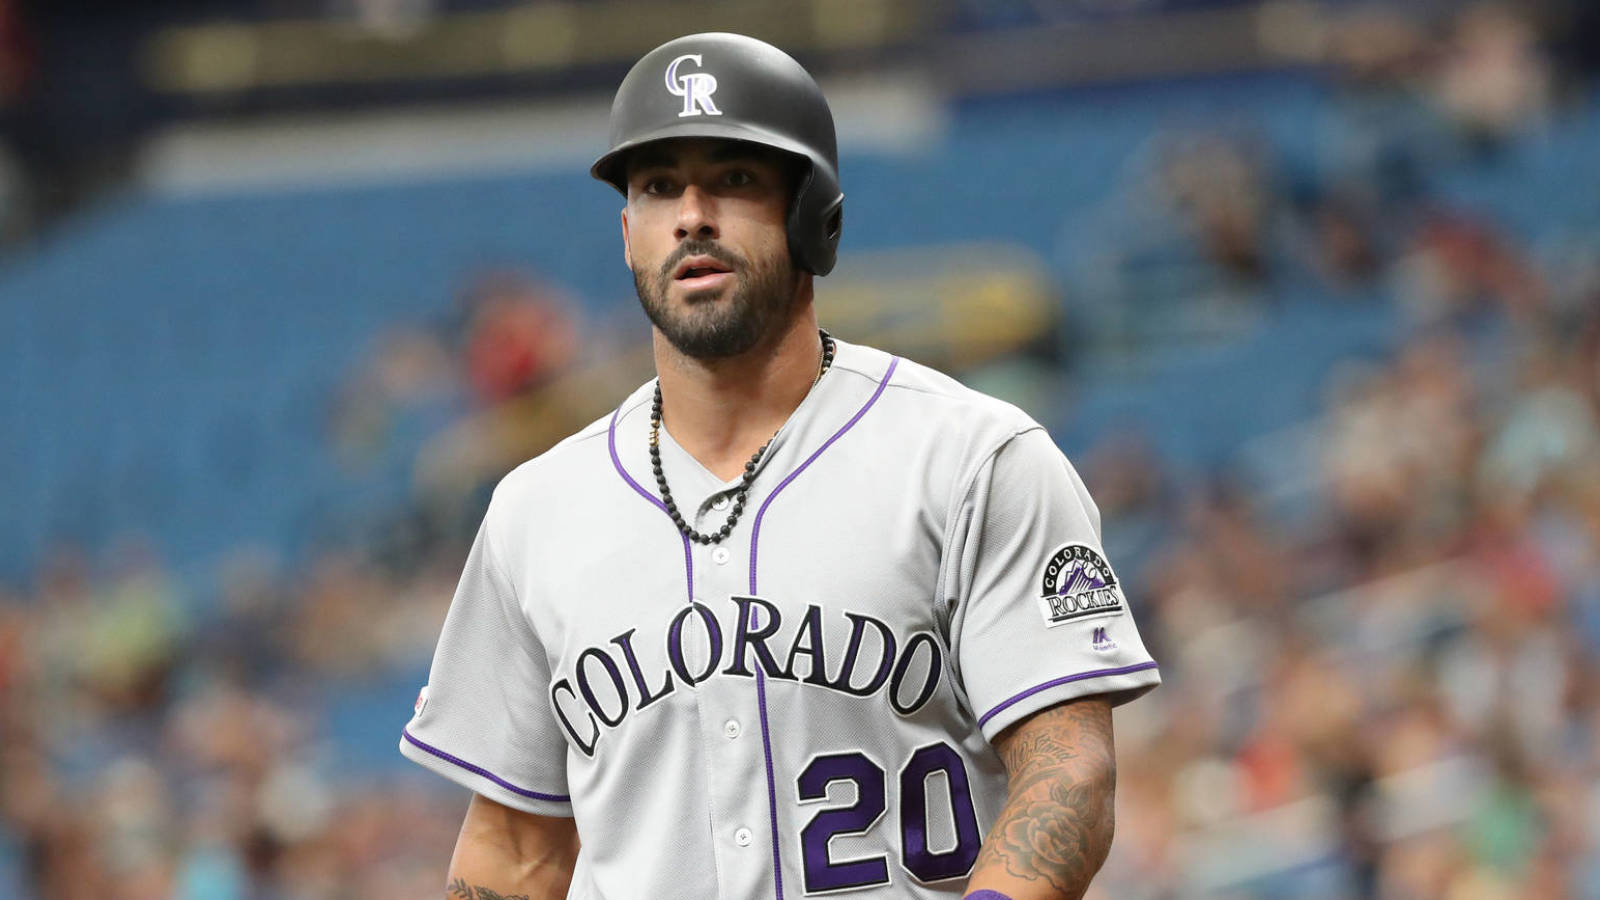 Rockies' Ian Desmond opts out of 2021 season to spend time with family